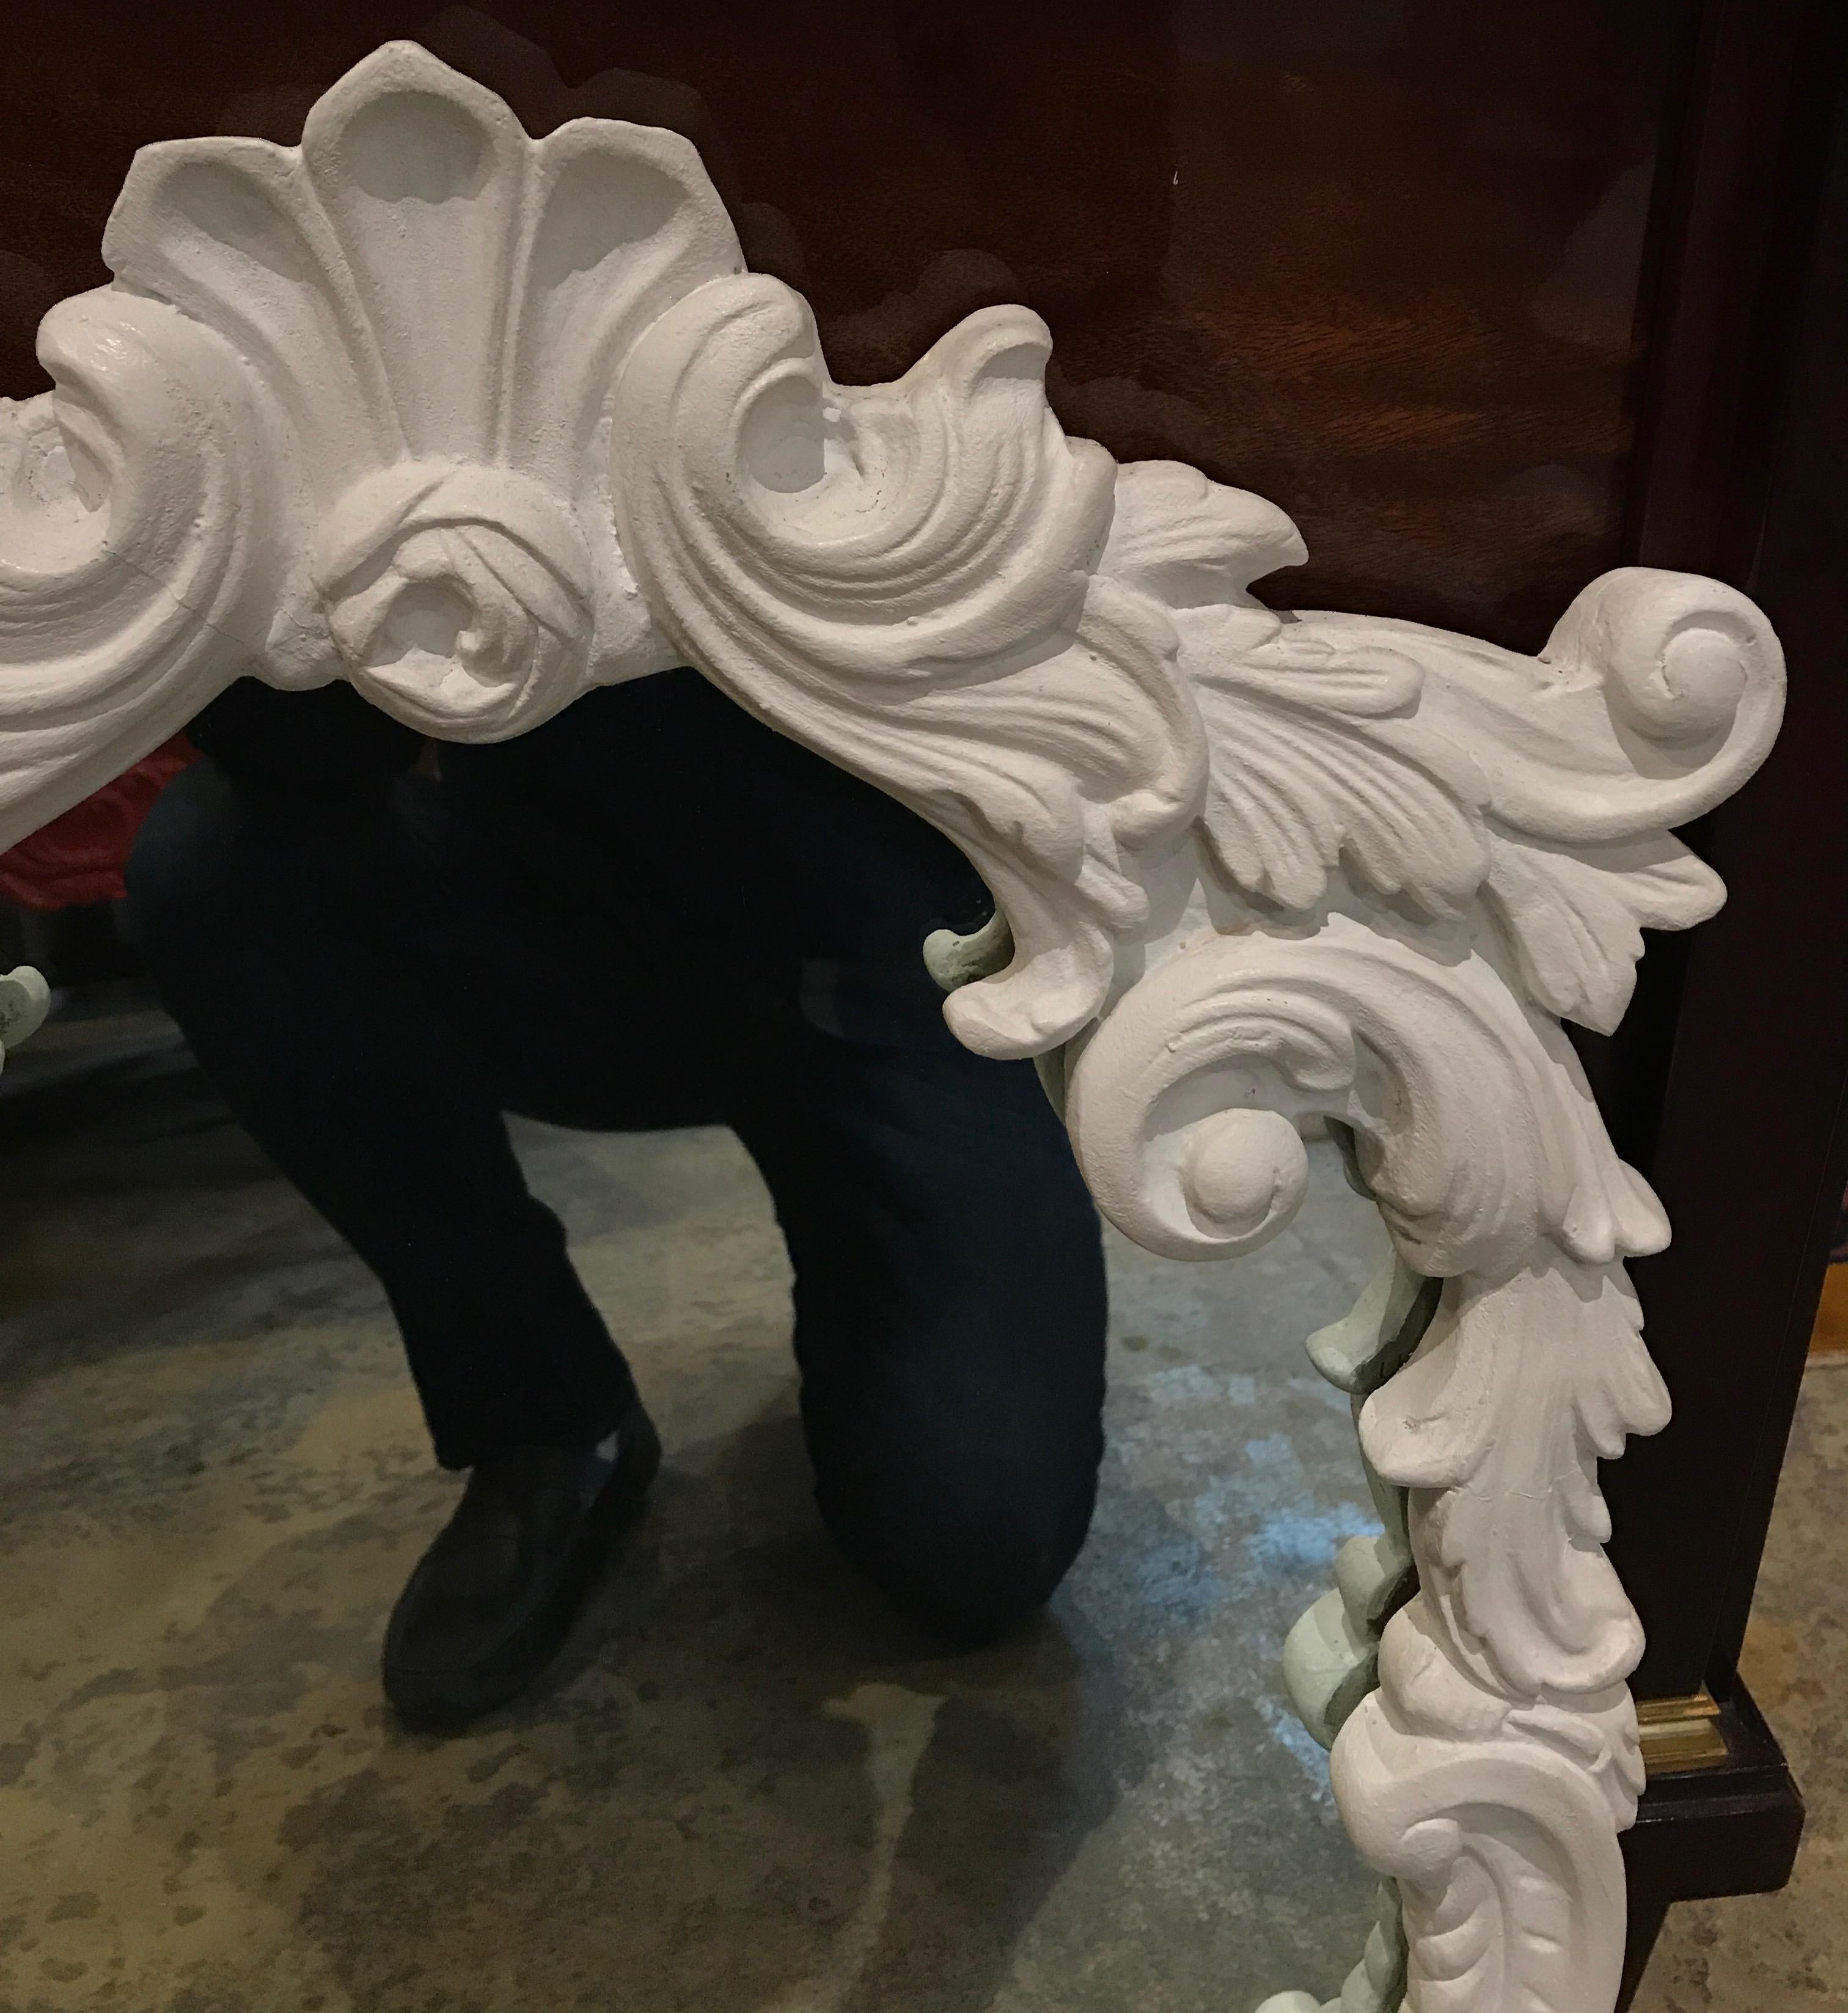 The frame of this mirror is made entirely from poured, molded plaster. The white floral and leafy themes elegantly sweep and flow around the frame in 3 dimensions.